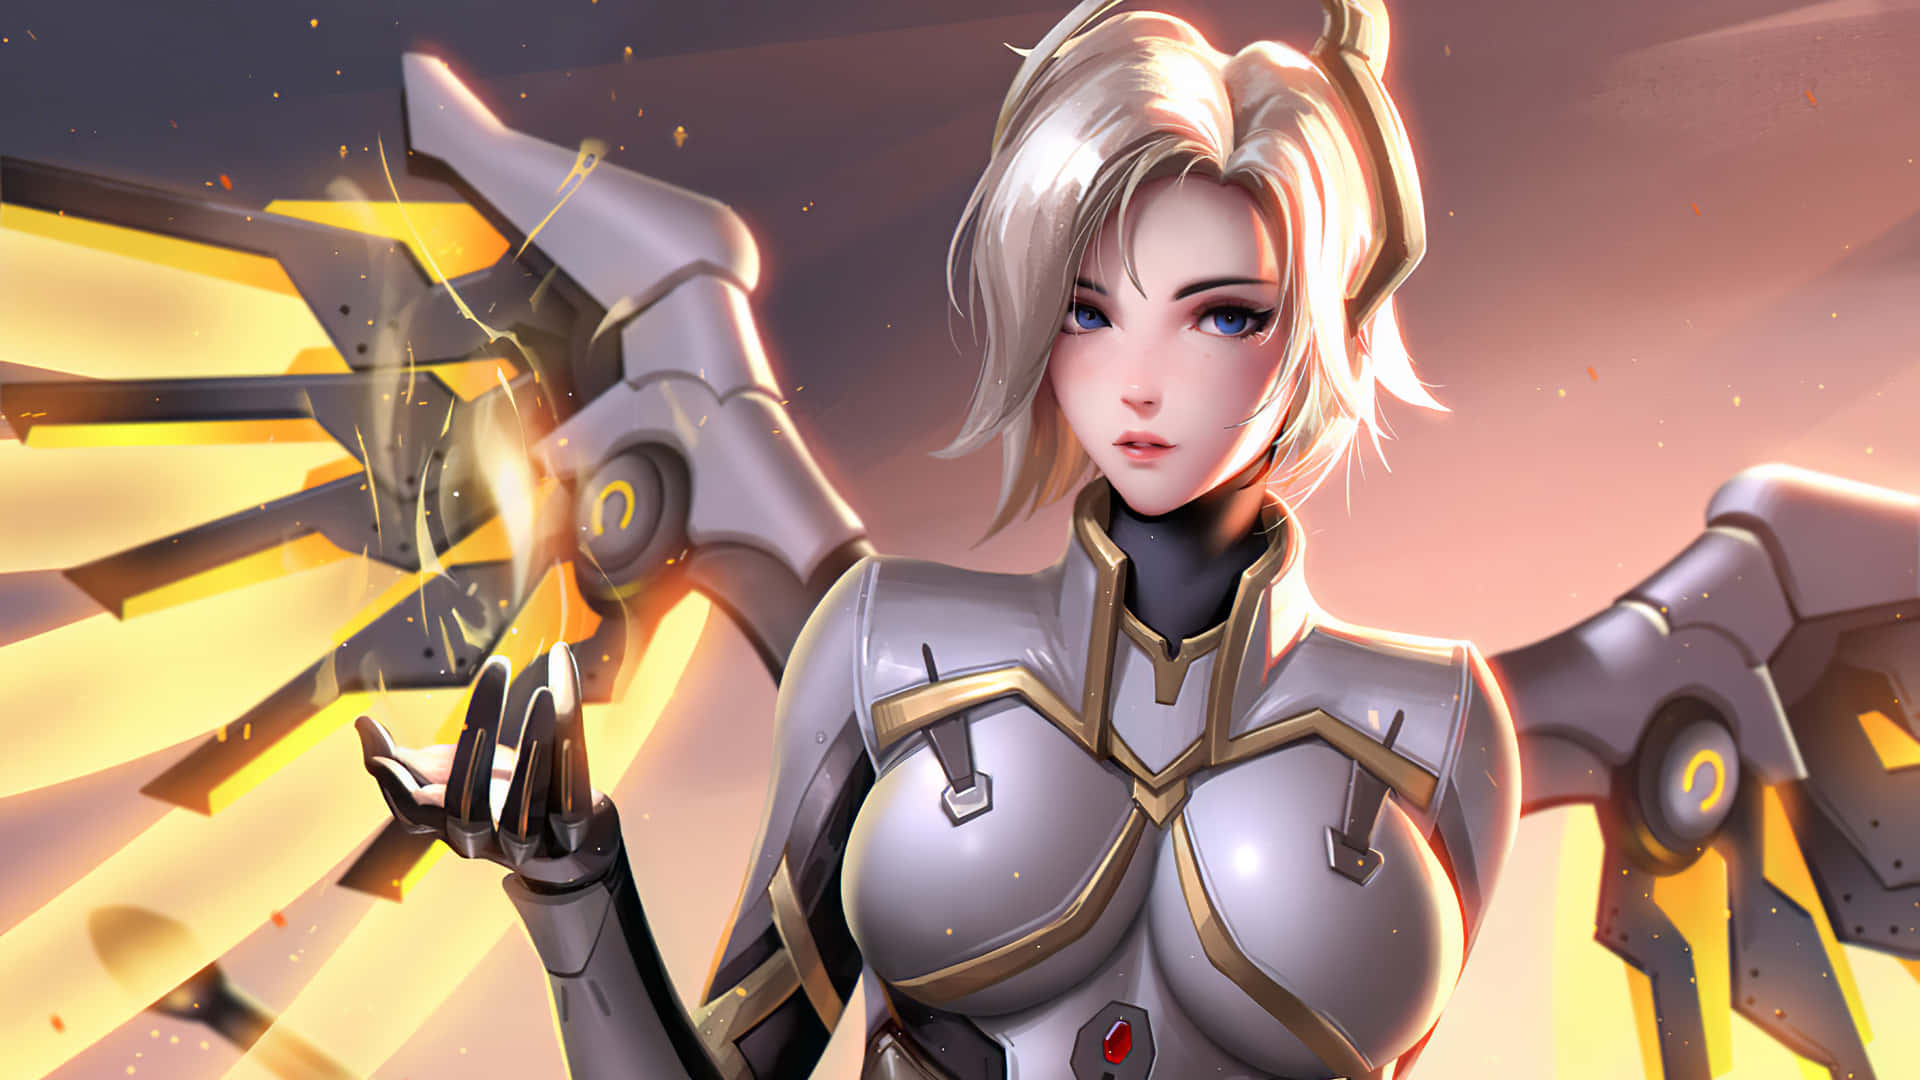 Showing Mercy, giving salvation Wallpaper